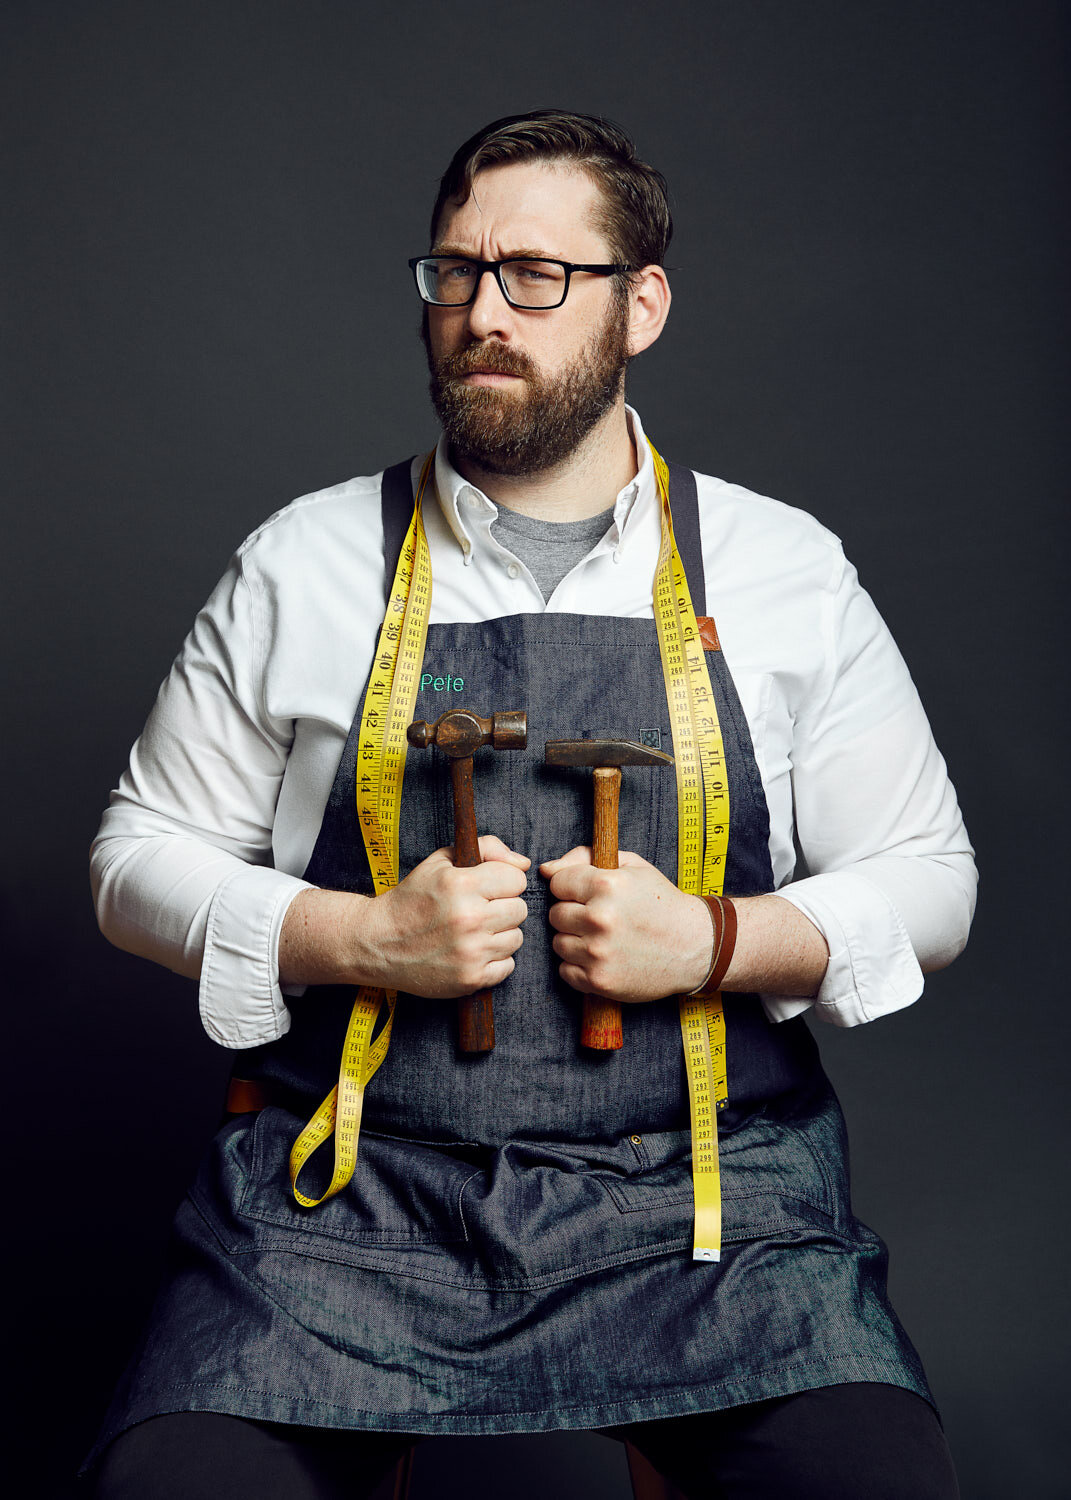 quirky portrait of leather worker holding tools by studio portrait photographer Hanna Agar